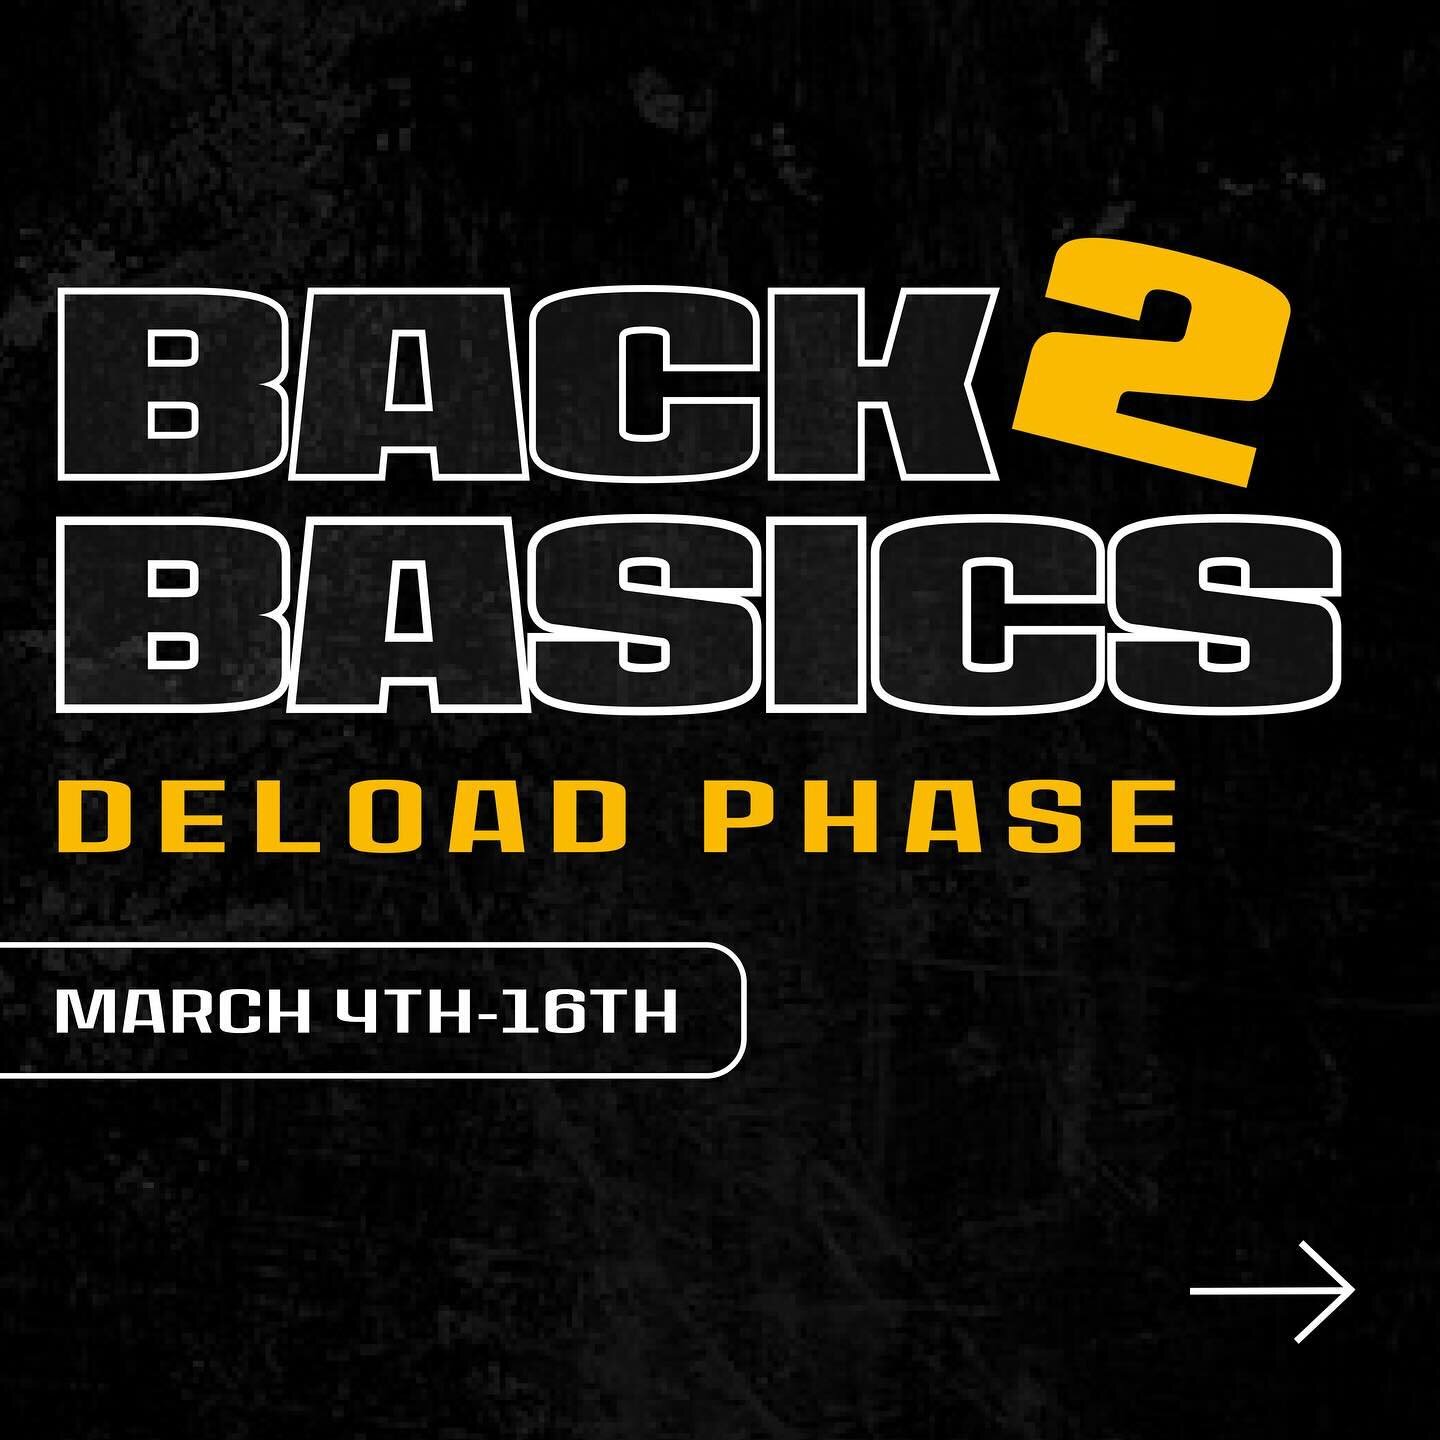 Congratulations on completing Phase One of 2024! Tomorrow we will begin our 2 week deload phase called Back 2 Basics. We will focus on form and technique of foundational movements while bring down the intensity just a little bit. 

Phase 2 of 2024 wi